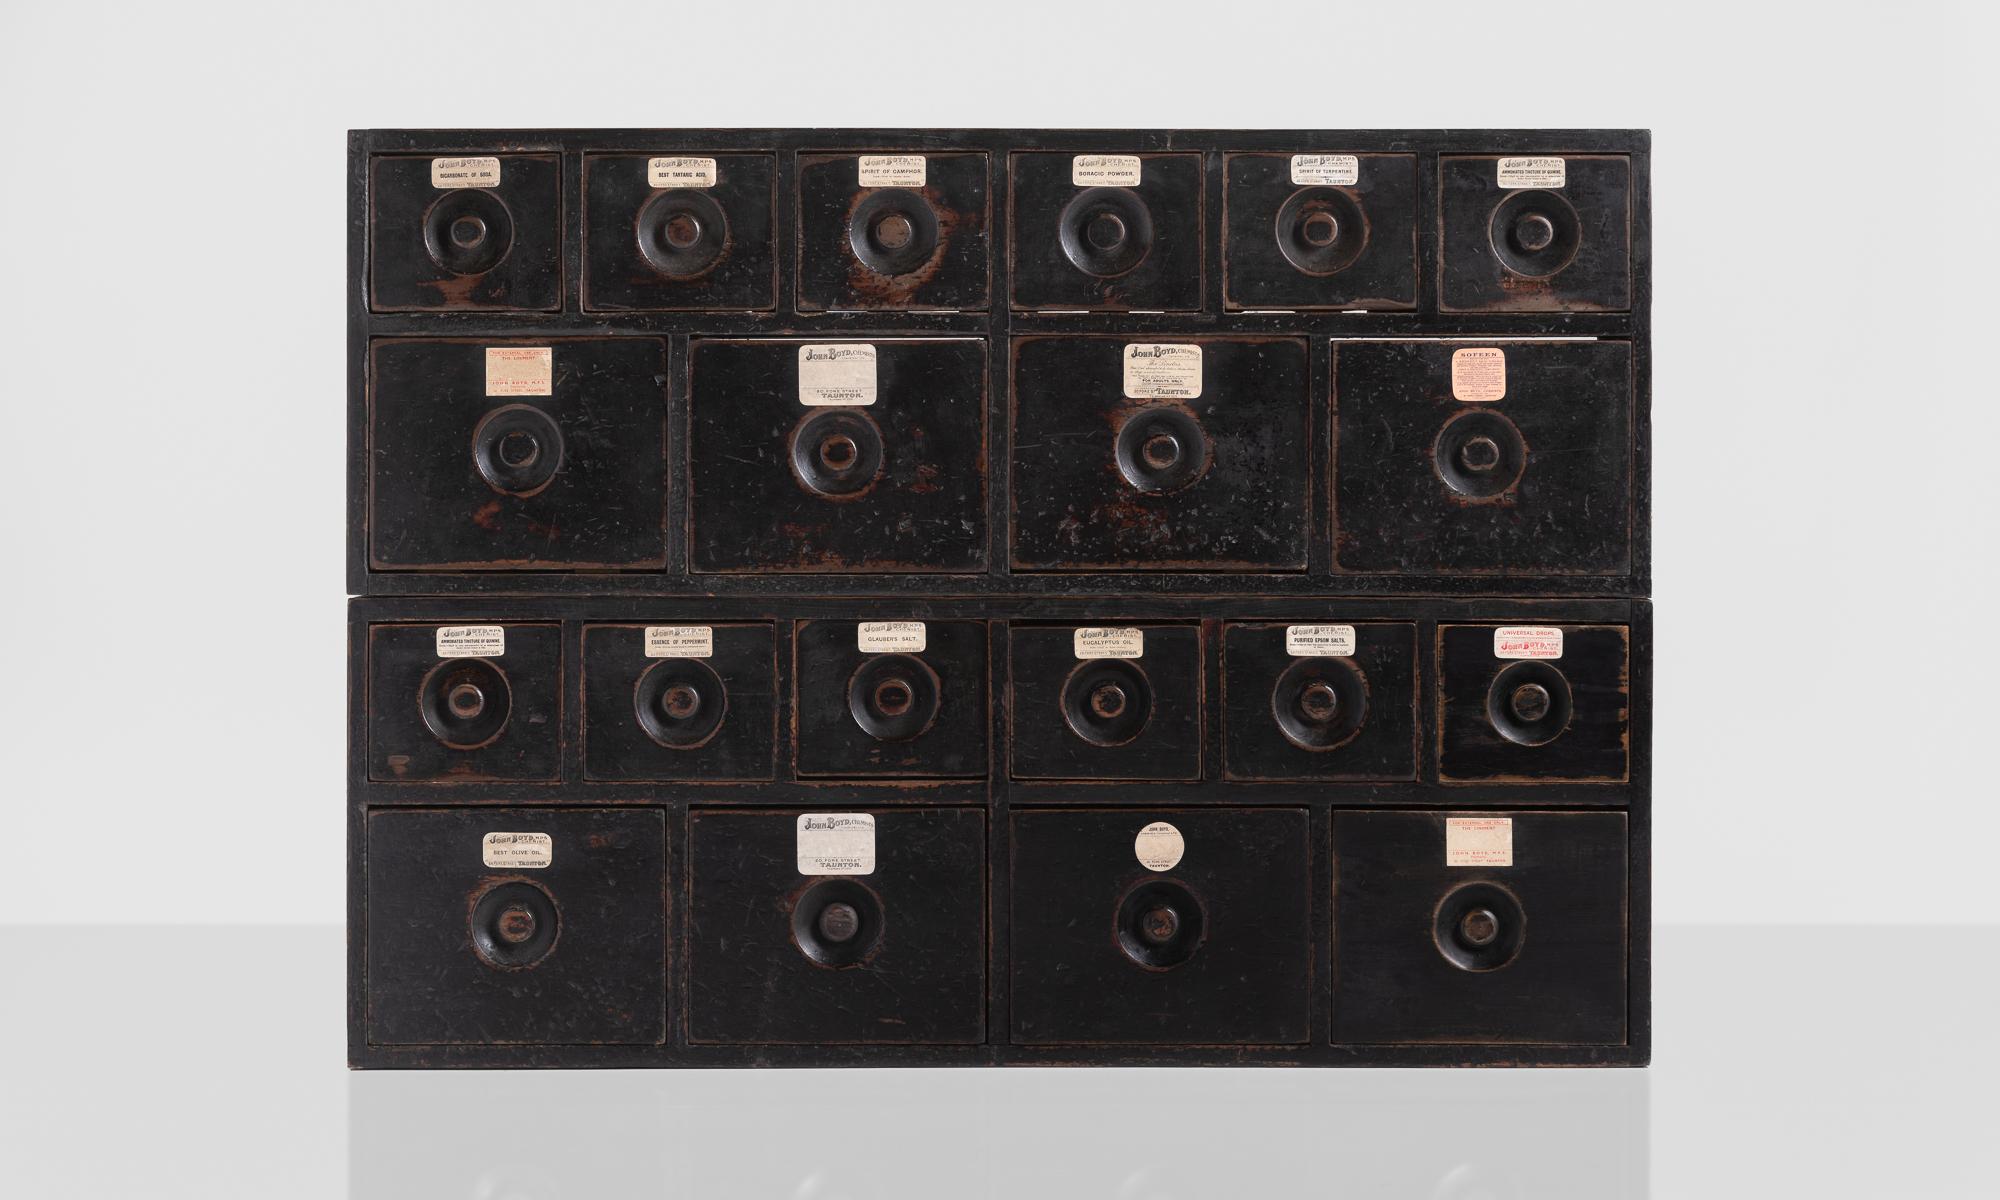 Apothecary chest of drawers, England, circa 1875.

Two-part form includes original labels, flush pulls and an amazing patina.